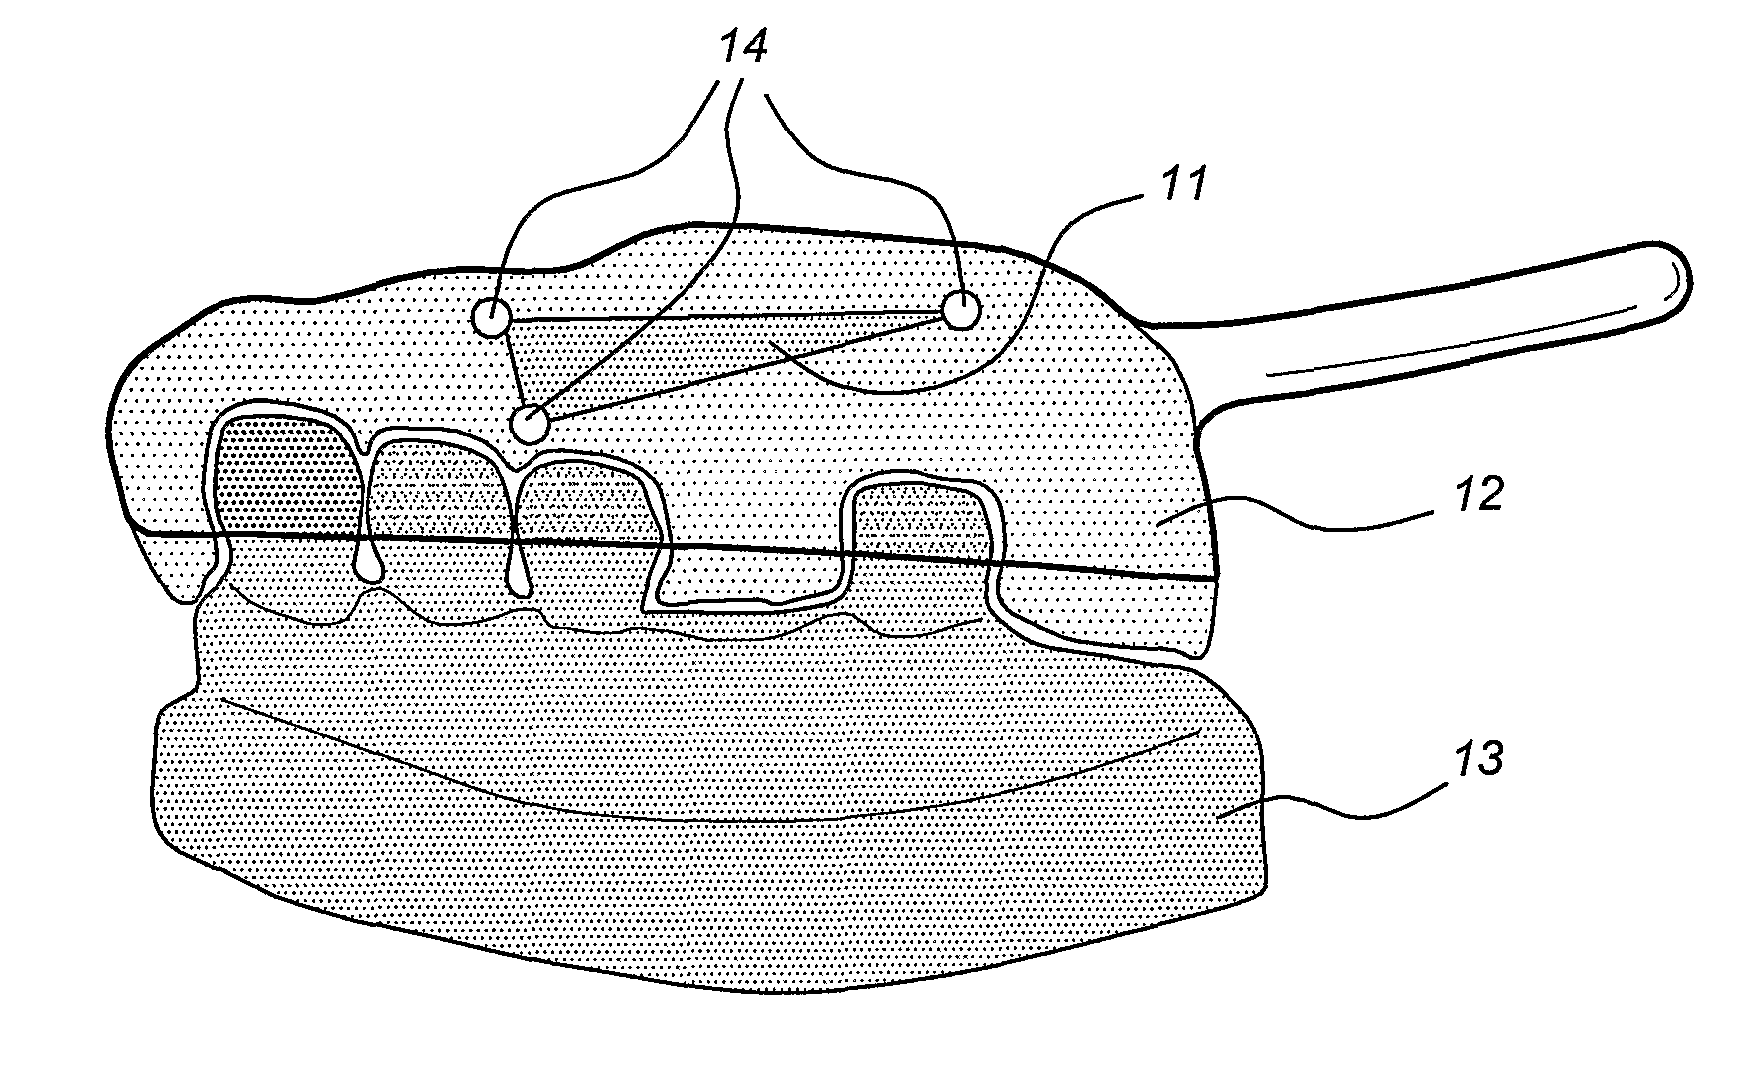 Method of Manufacturing and Installing a Ceramic Dental Implant with an Aesthetic Implant Abutment